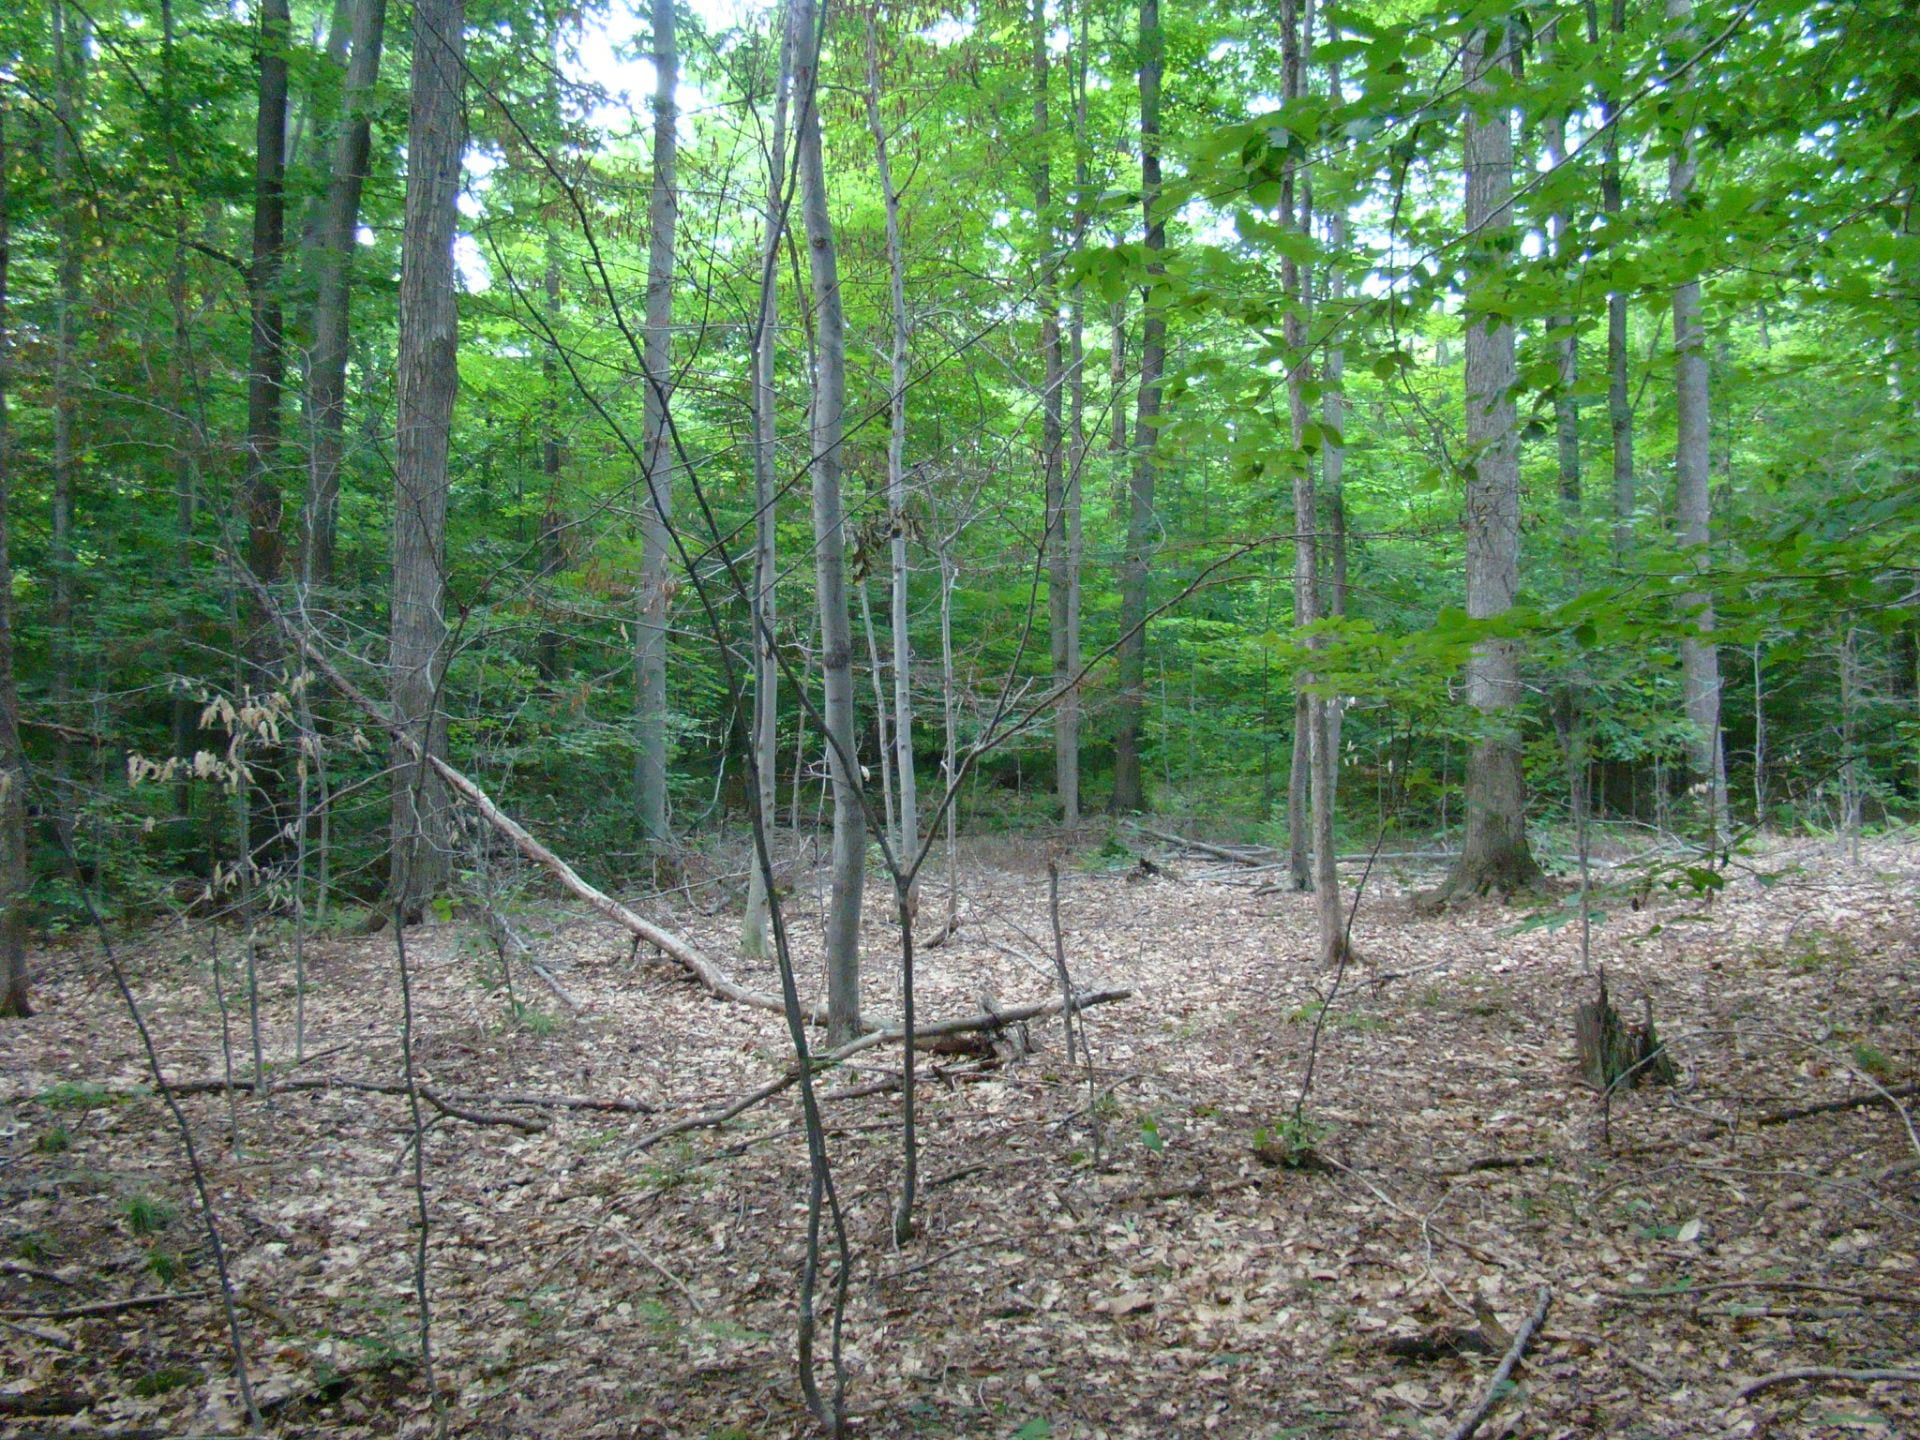 The background of this picture illustrates the upper canopy and subcanopy. The subcanopy was controlled in the foreground, with a significant increase in sunlight to the forest floor. 